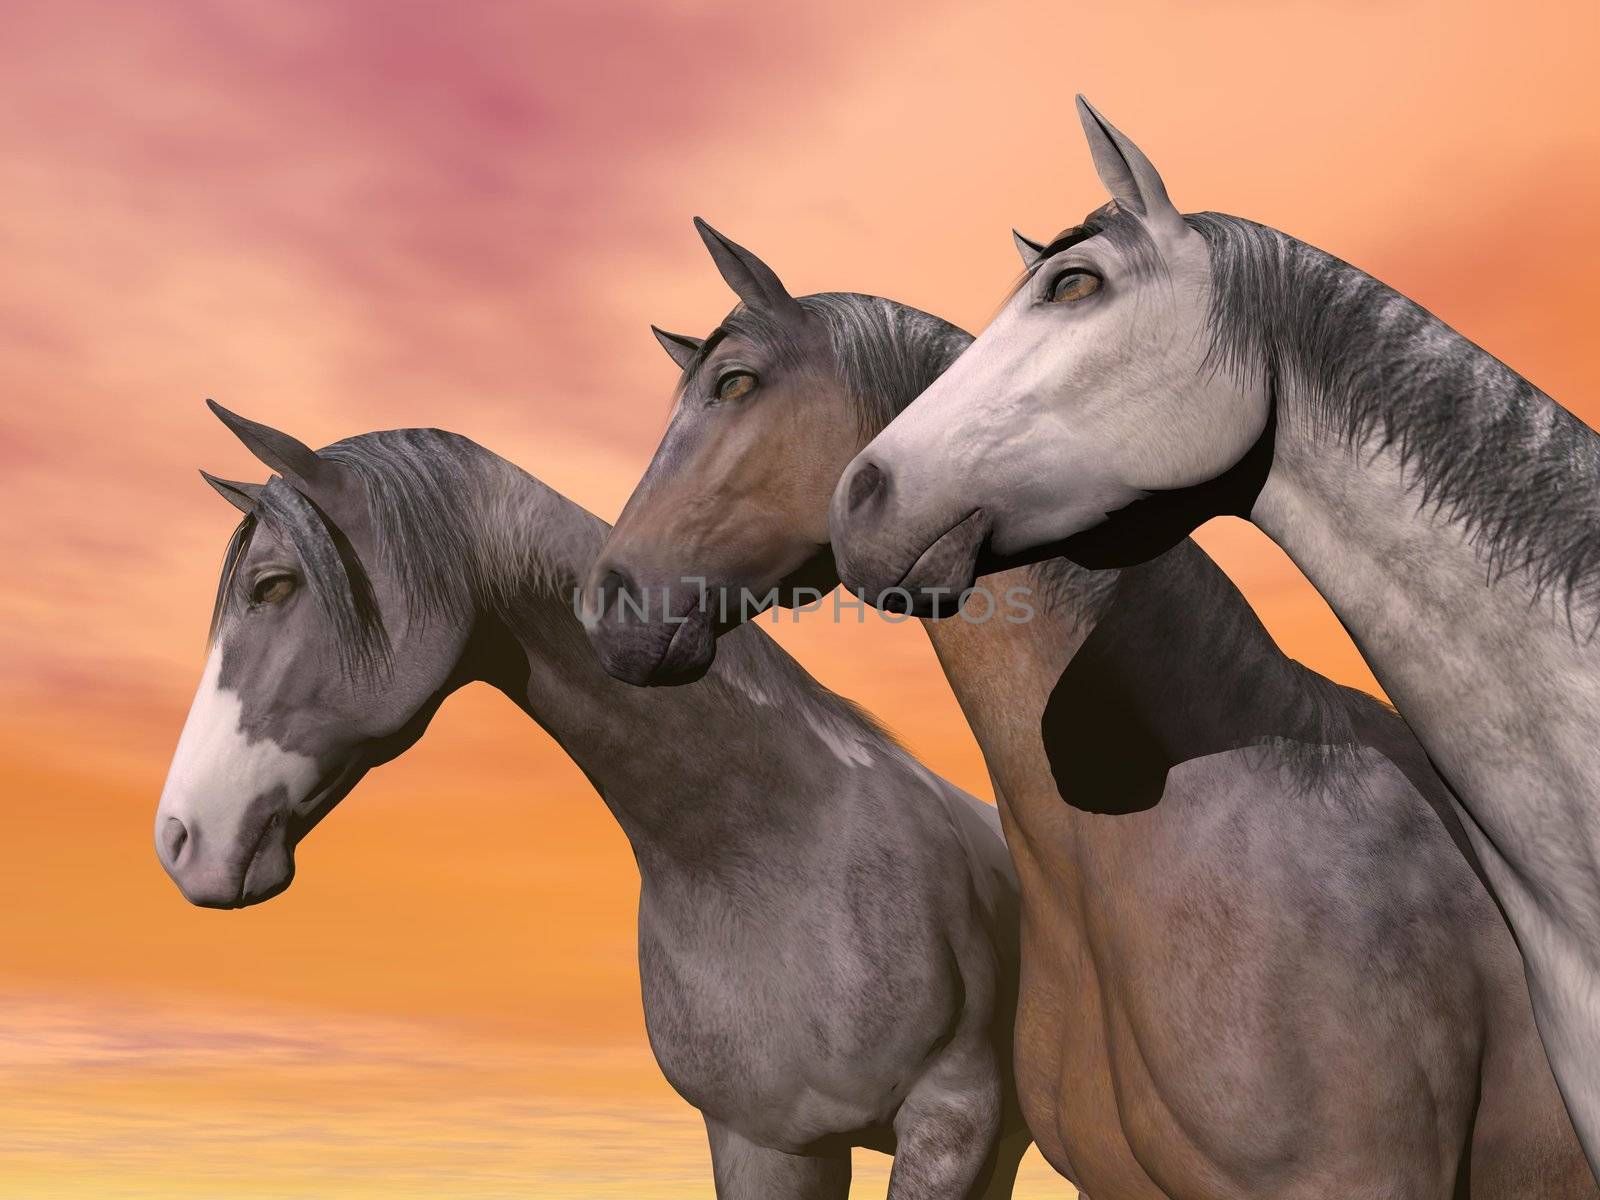 Portrait of three different horses quietly standing together in front of orange sunset sky